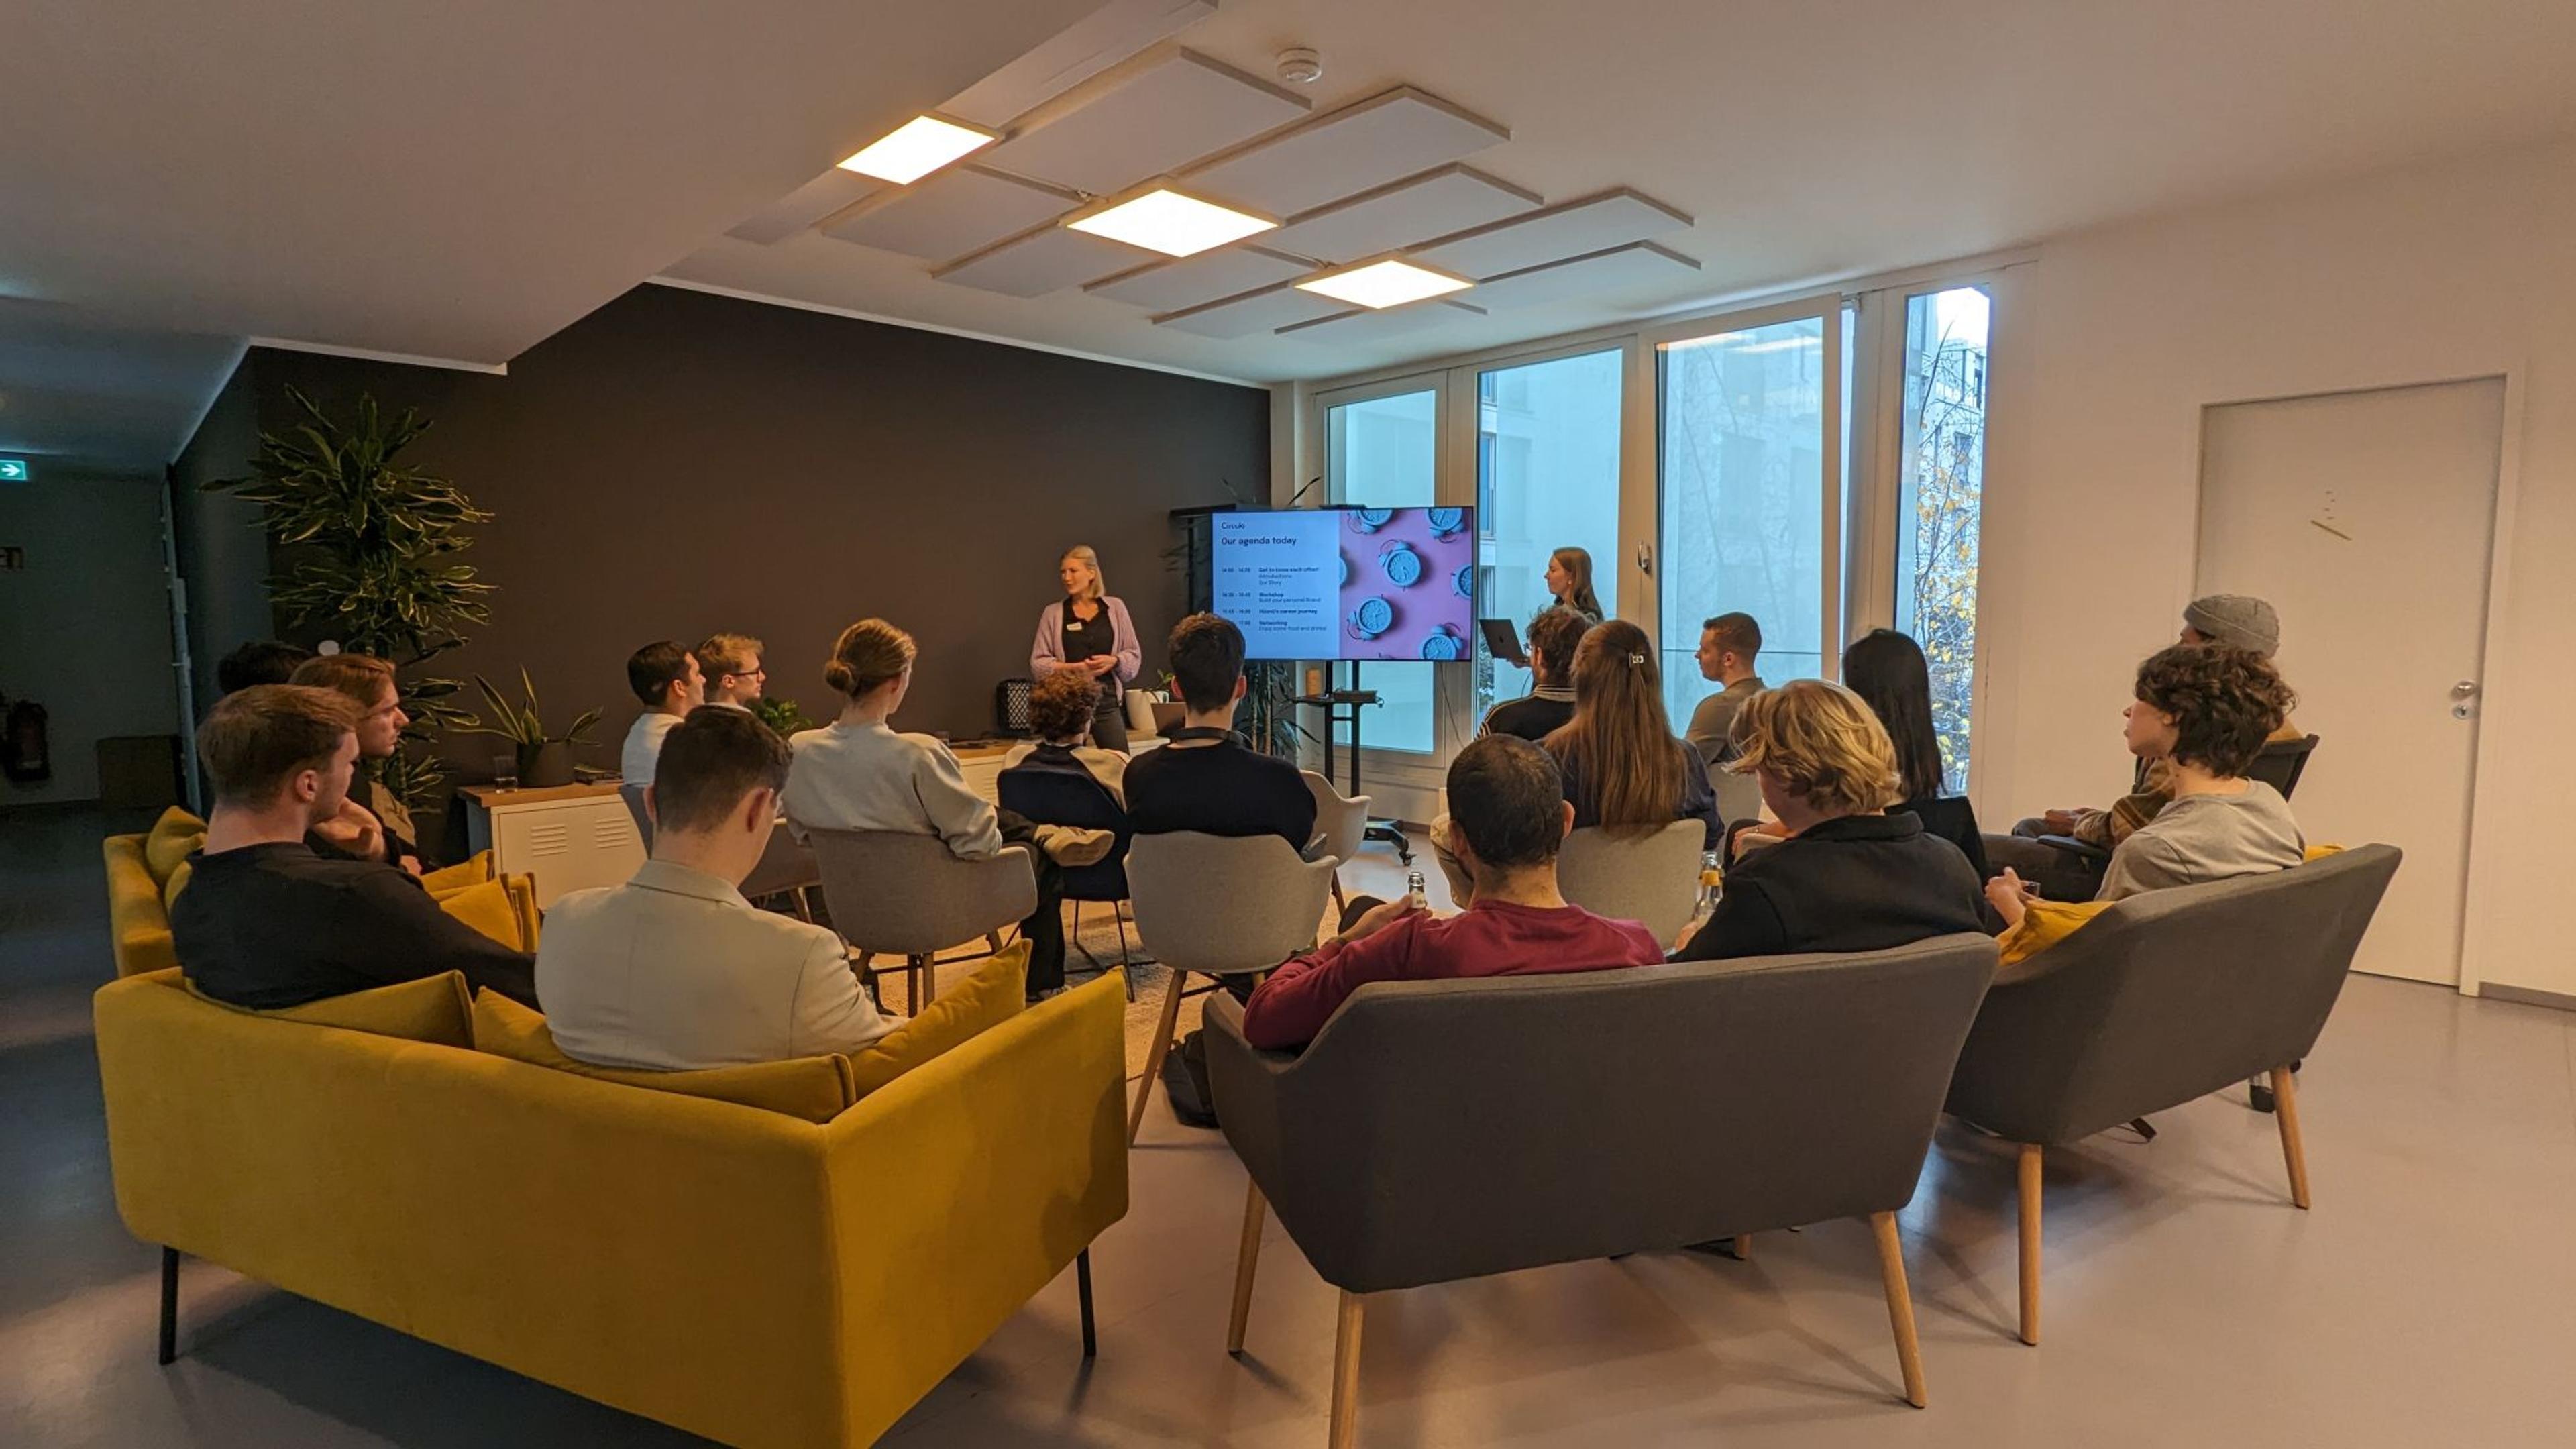 16 students visited our Berlin office to learn about personal branding on LinkedIn and life at Circula.